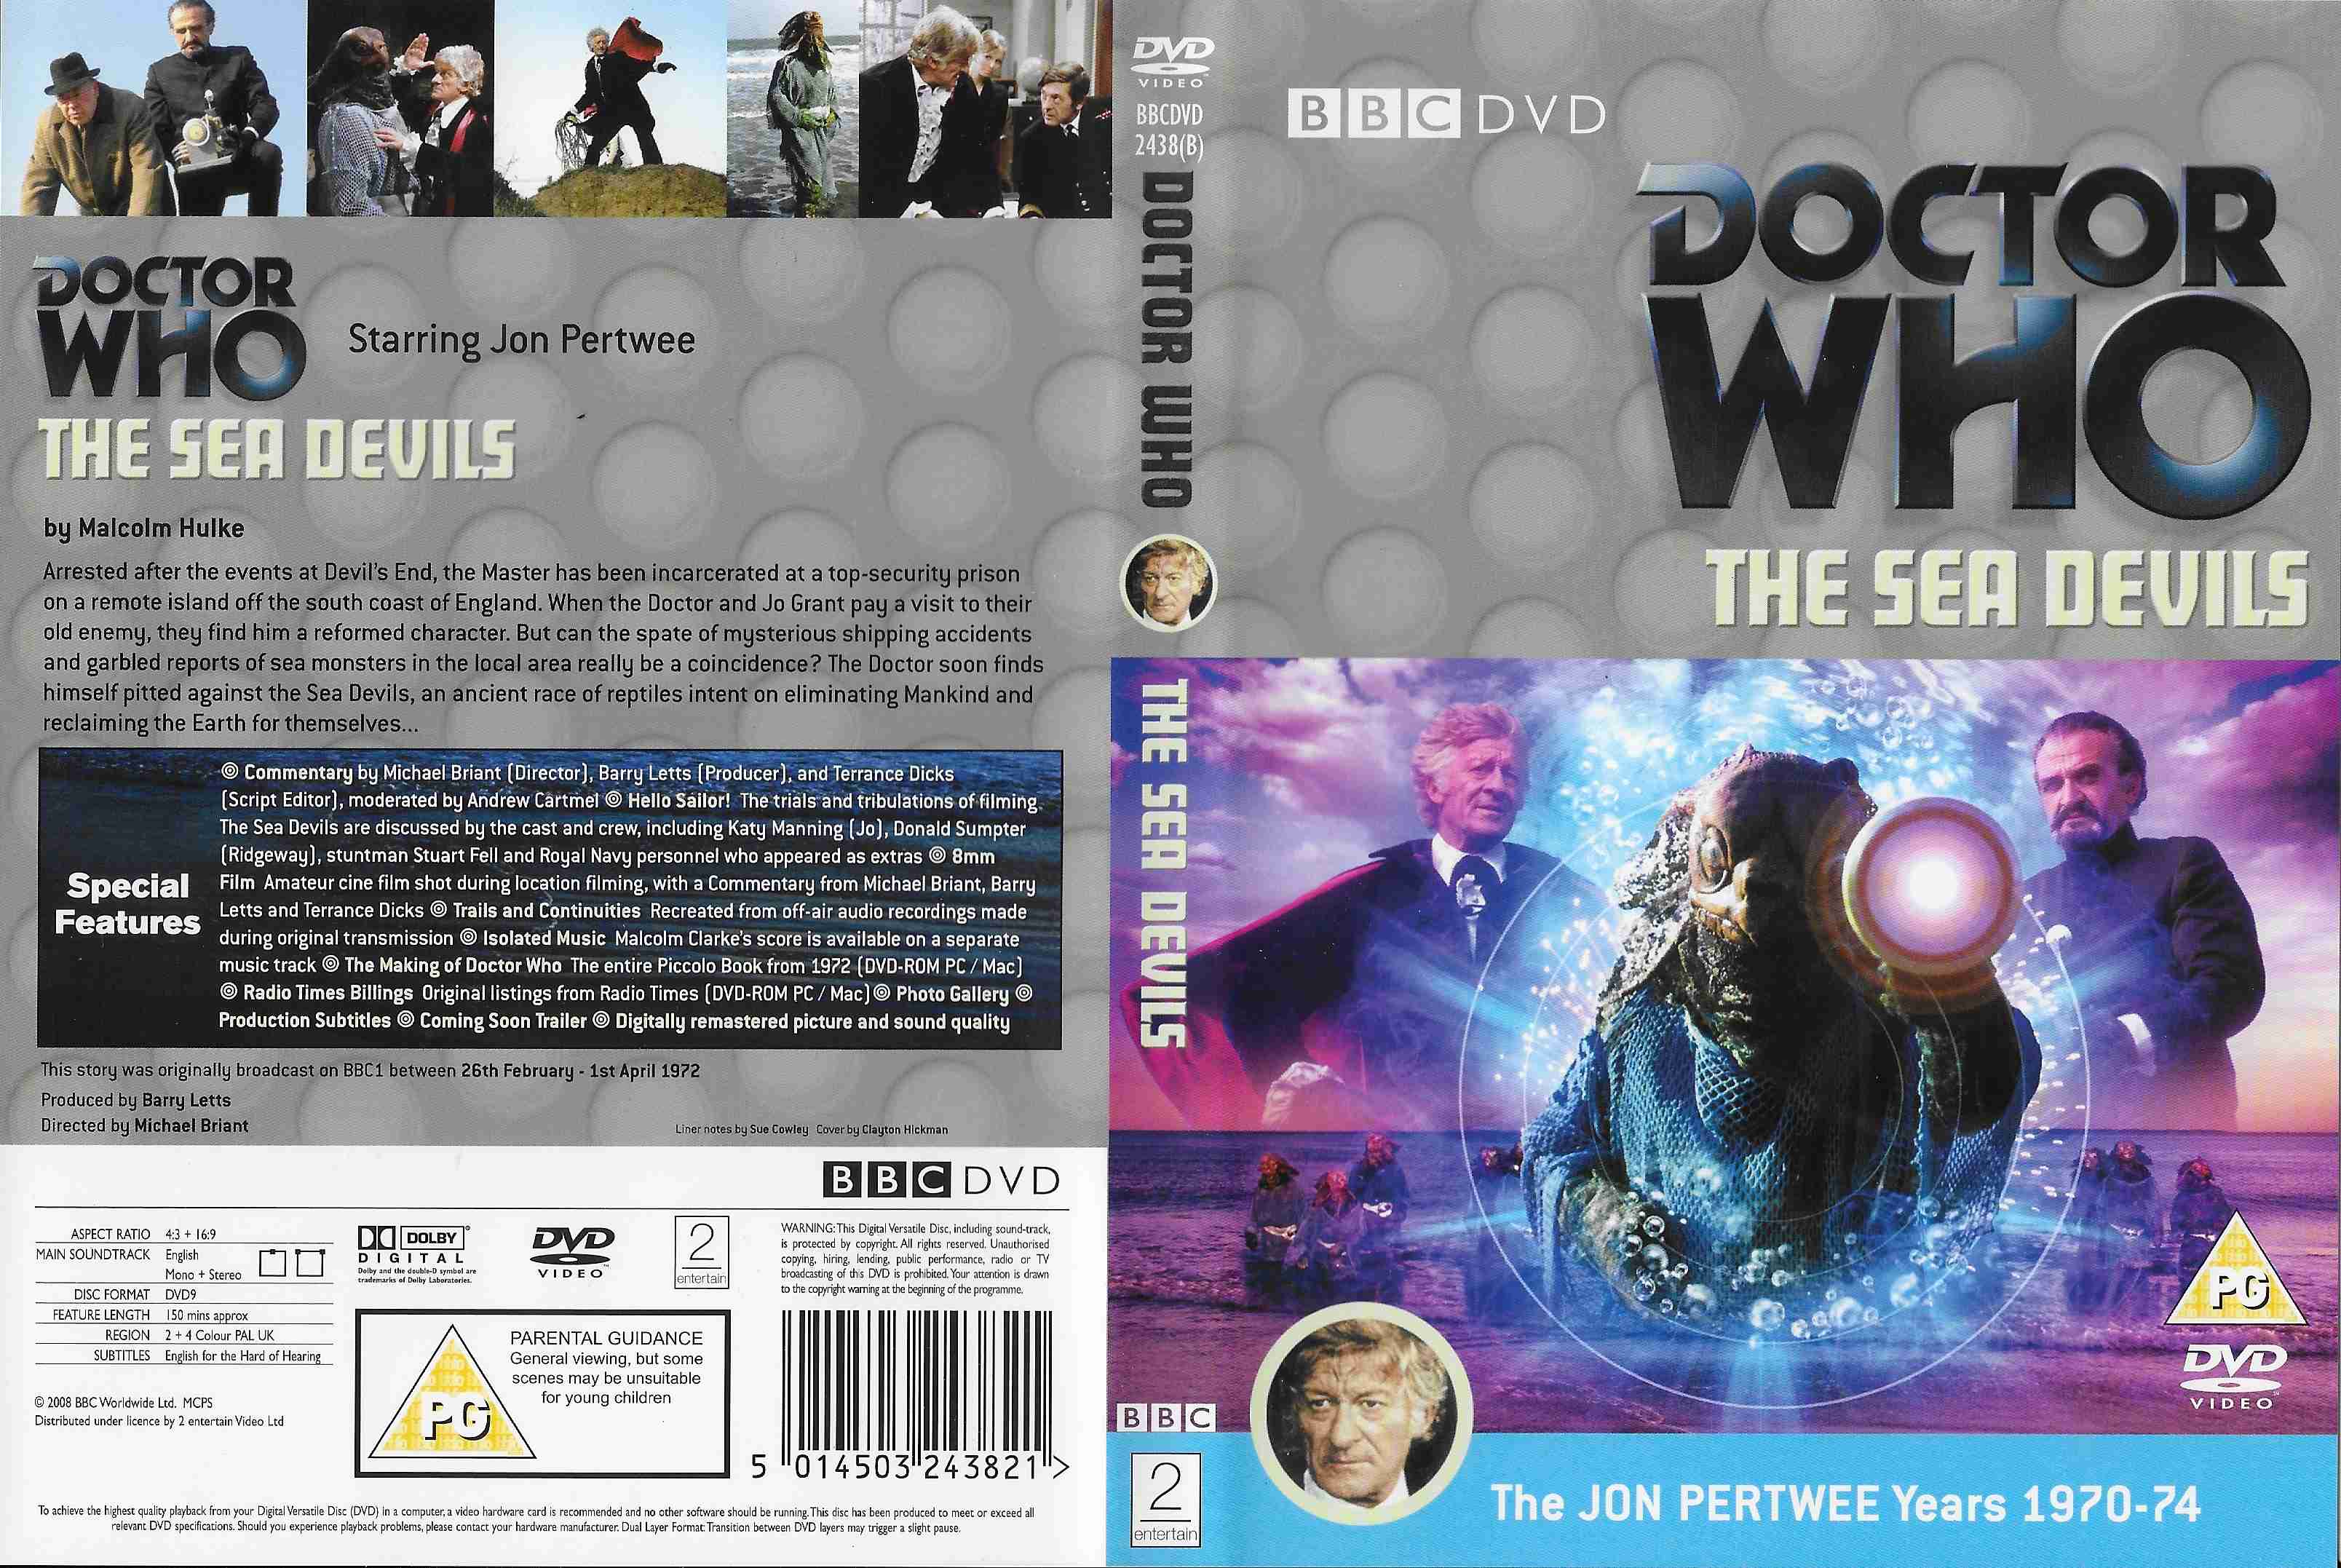 Picture of BBCDVD 2438B Doctor Who - The sea devils by artist Malcolm Hulke from the BBC records and Tapes library